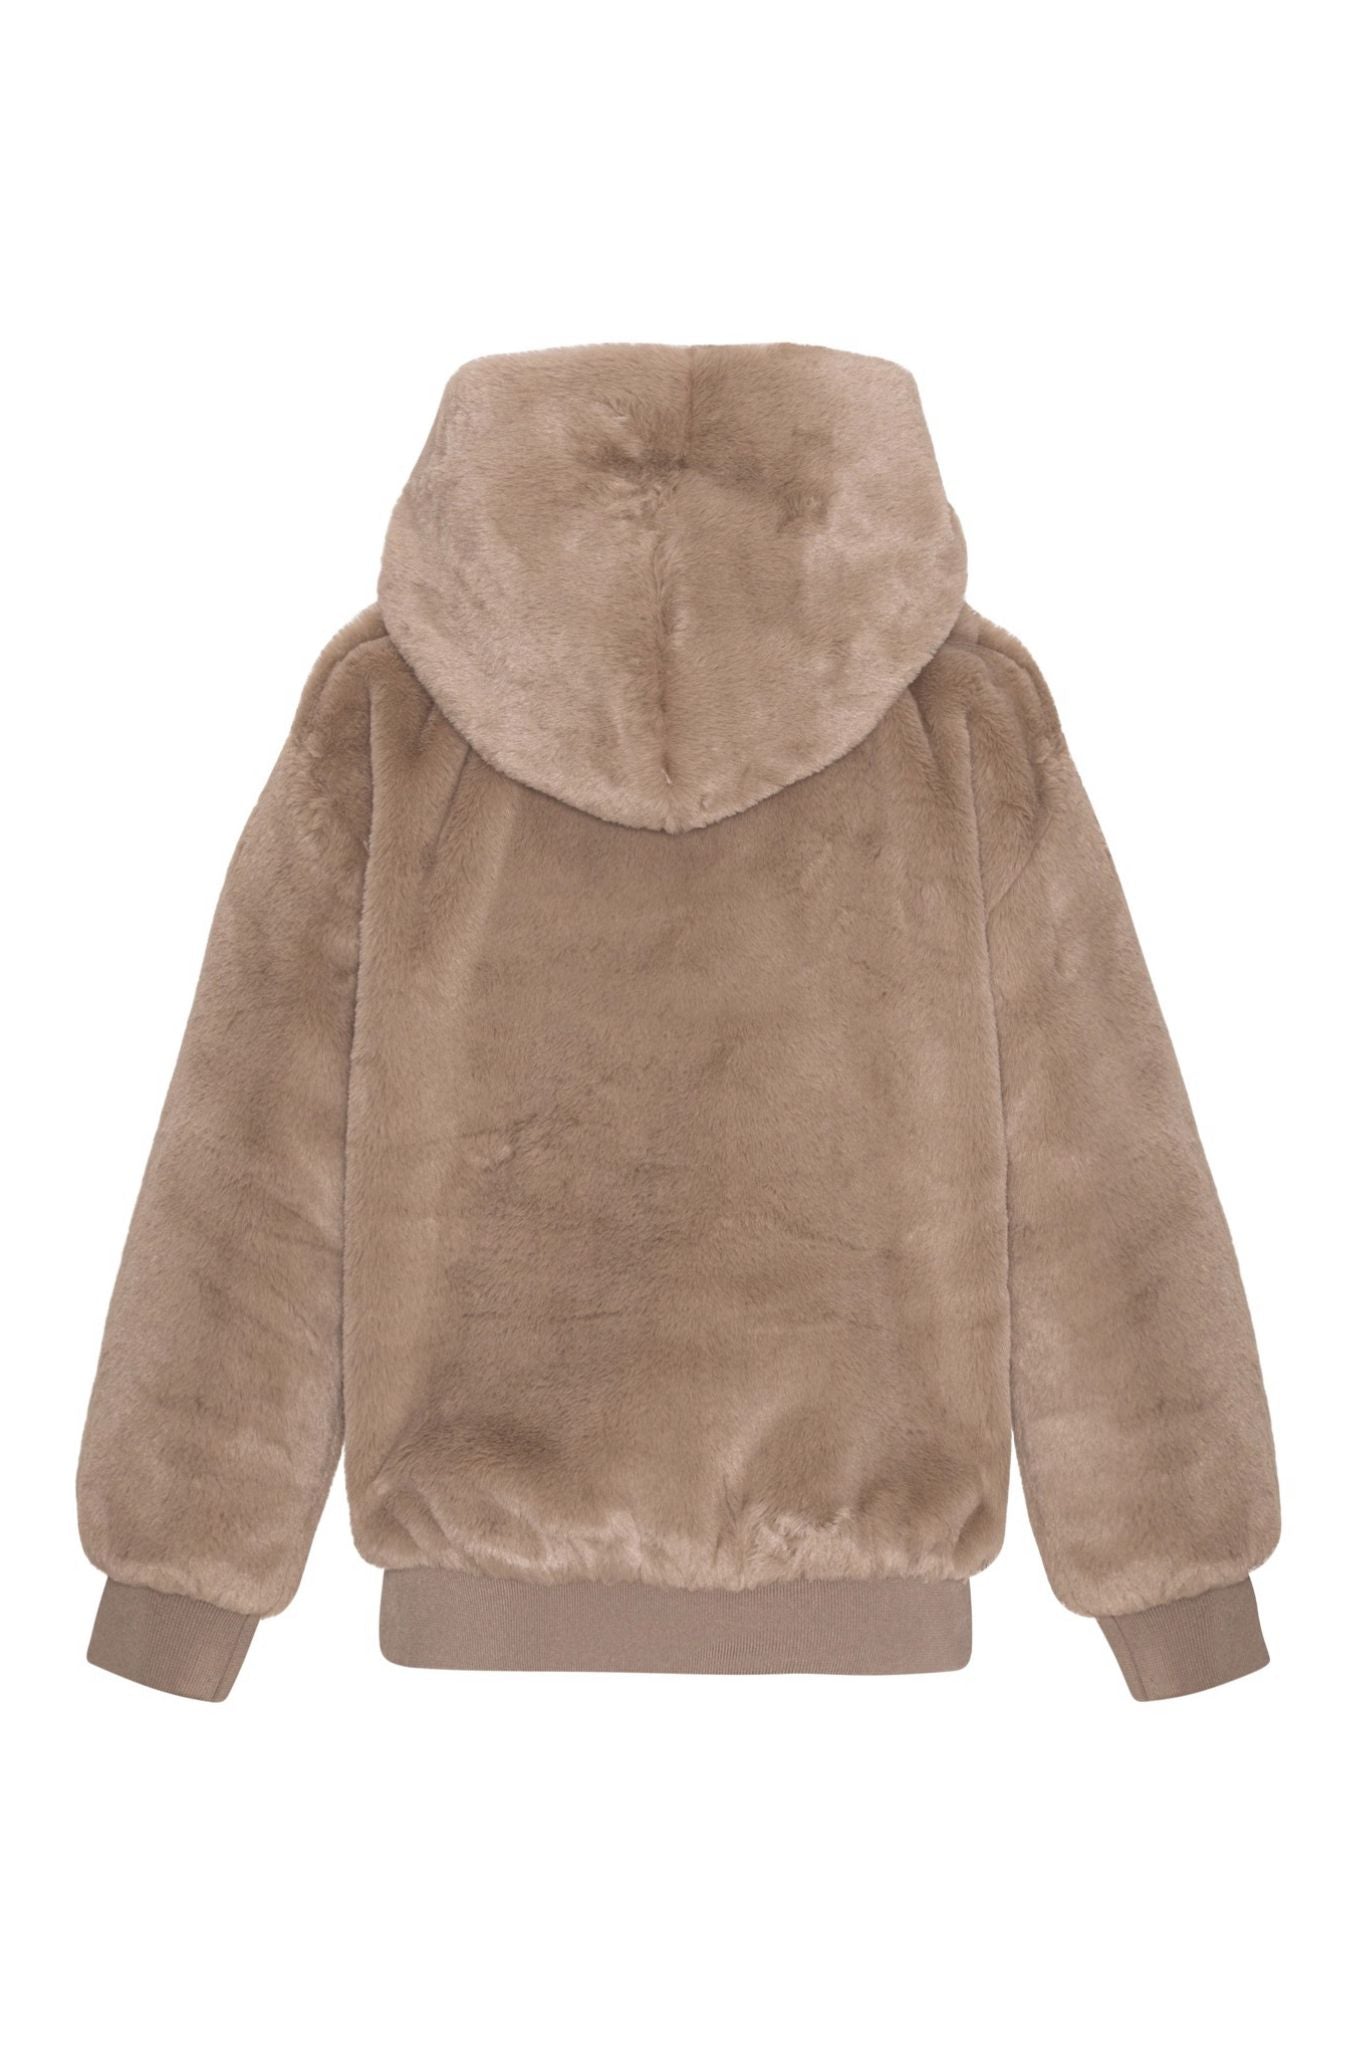 Grayson Collective Toddler Girls Faux Shearling Hoodie